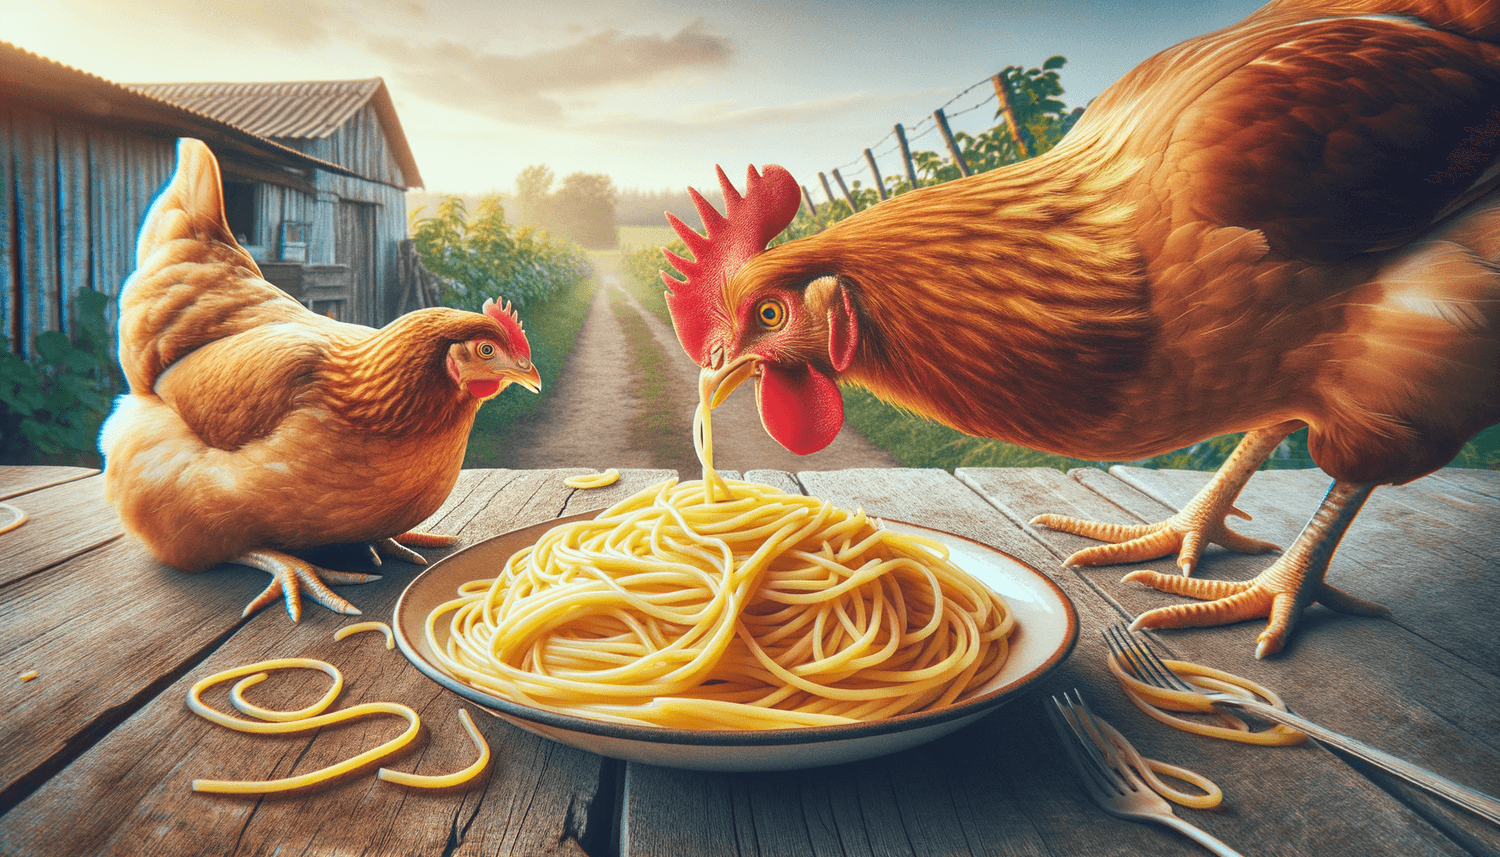 Can Chickens Eat Spaghetti?